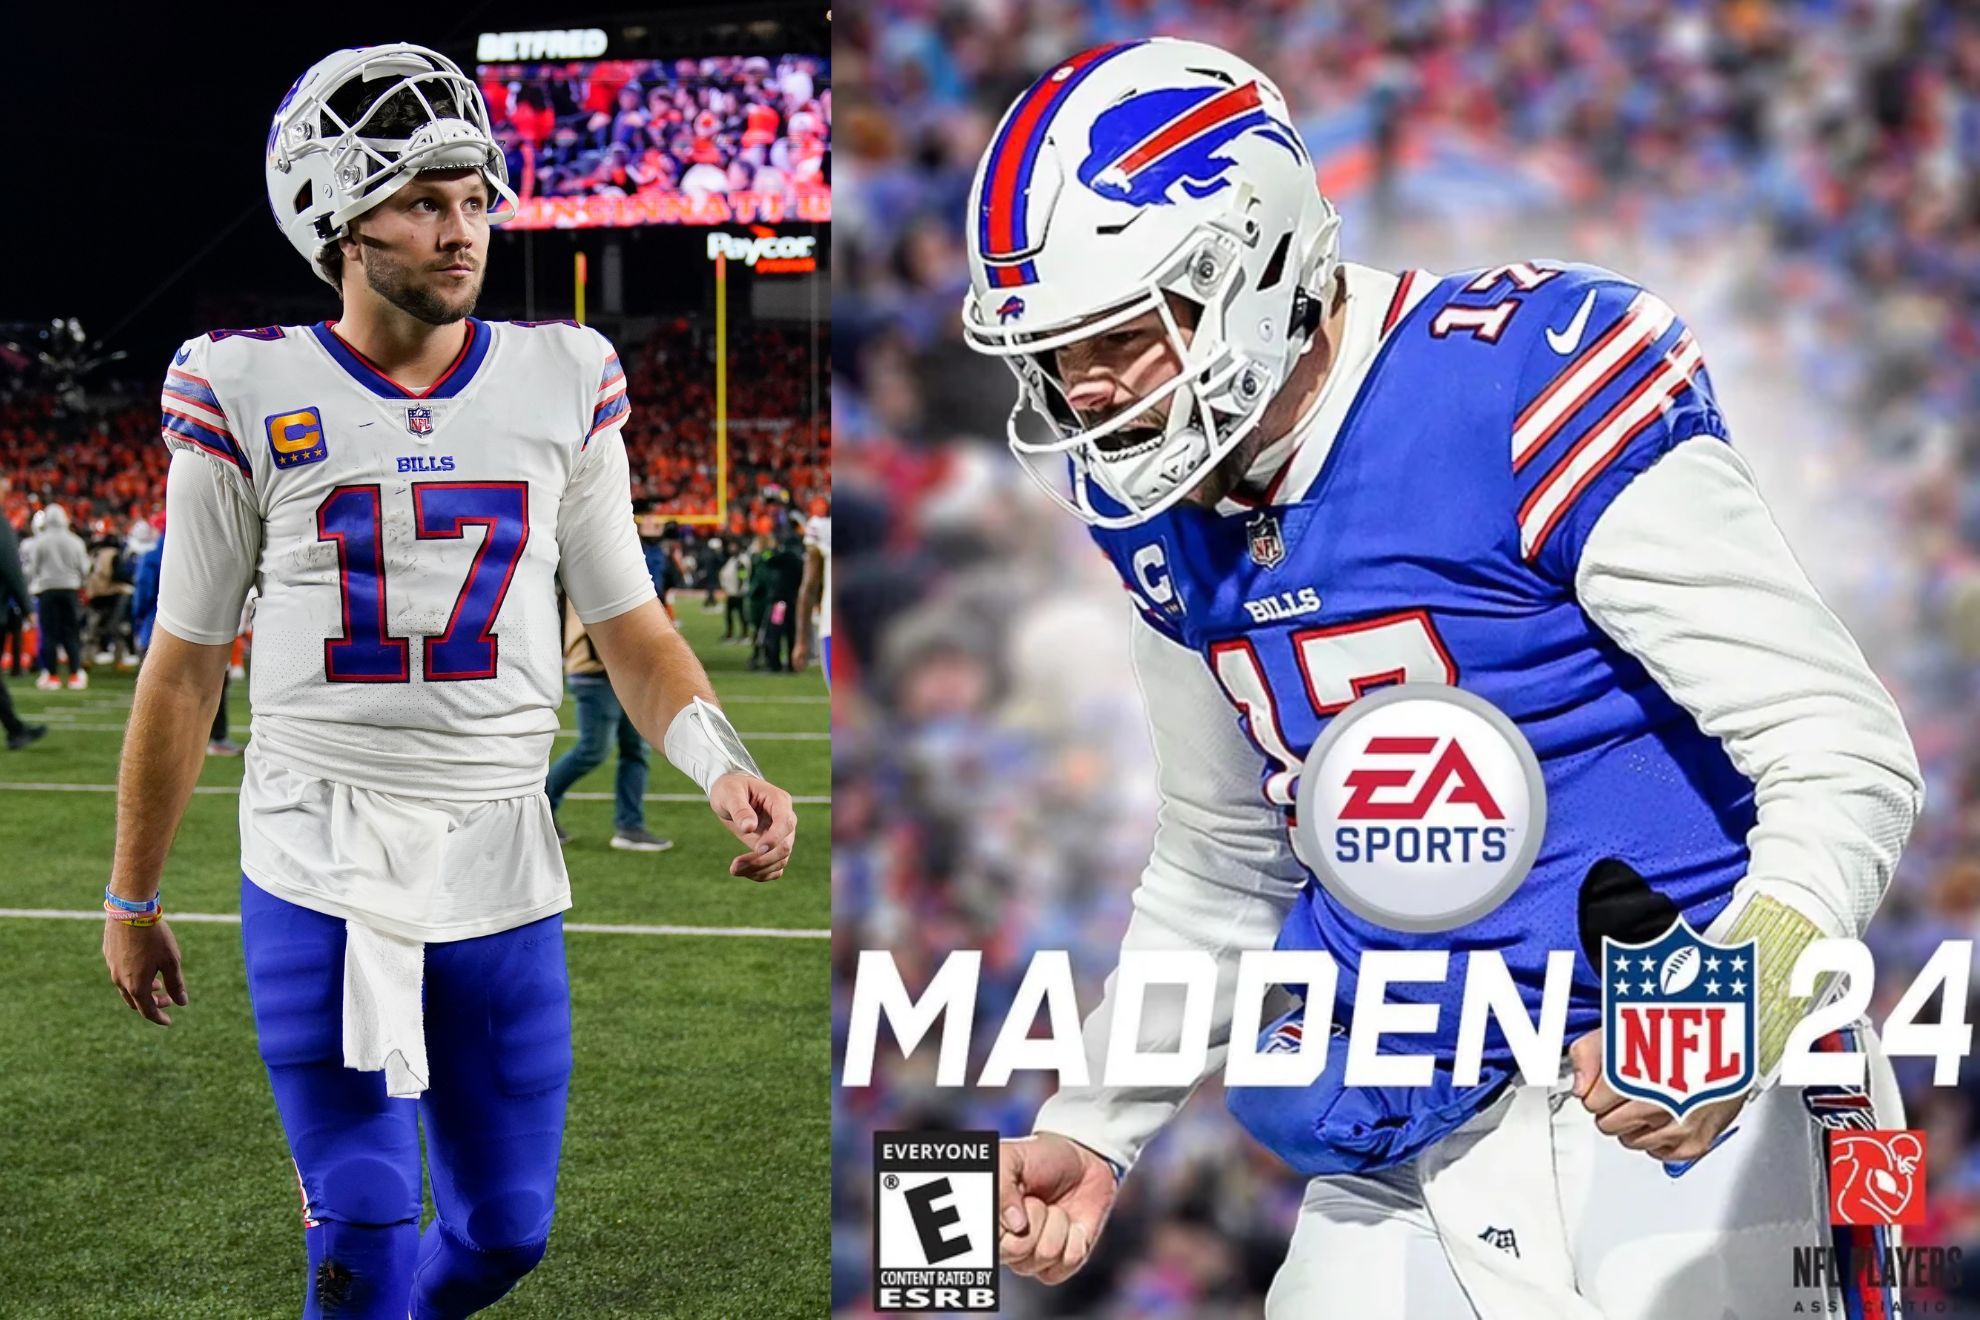 Josh Allen leads the NFL in turnovers: did being the cover of Madden prompt it?